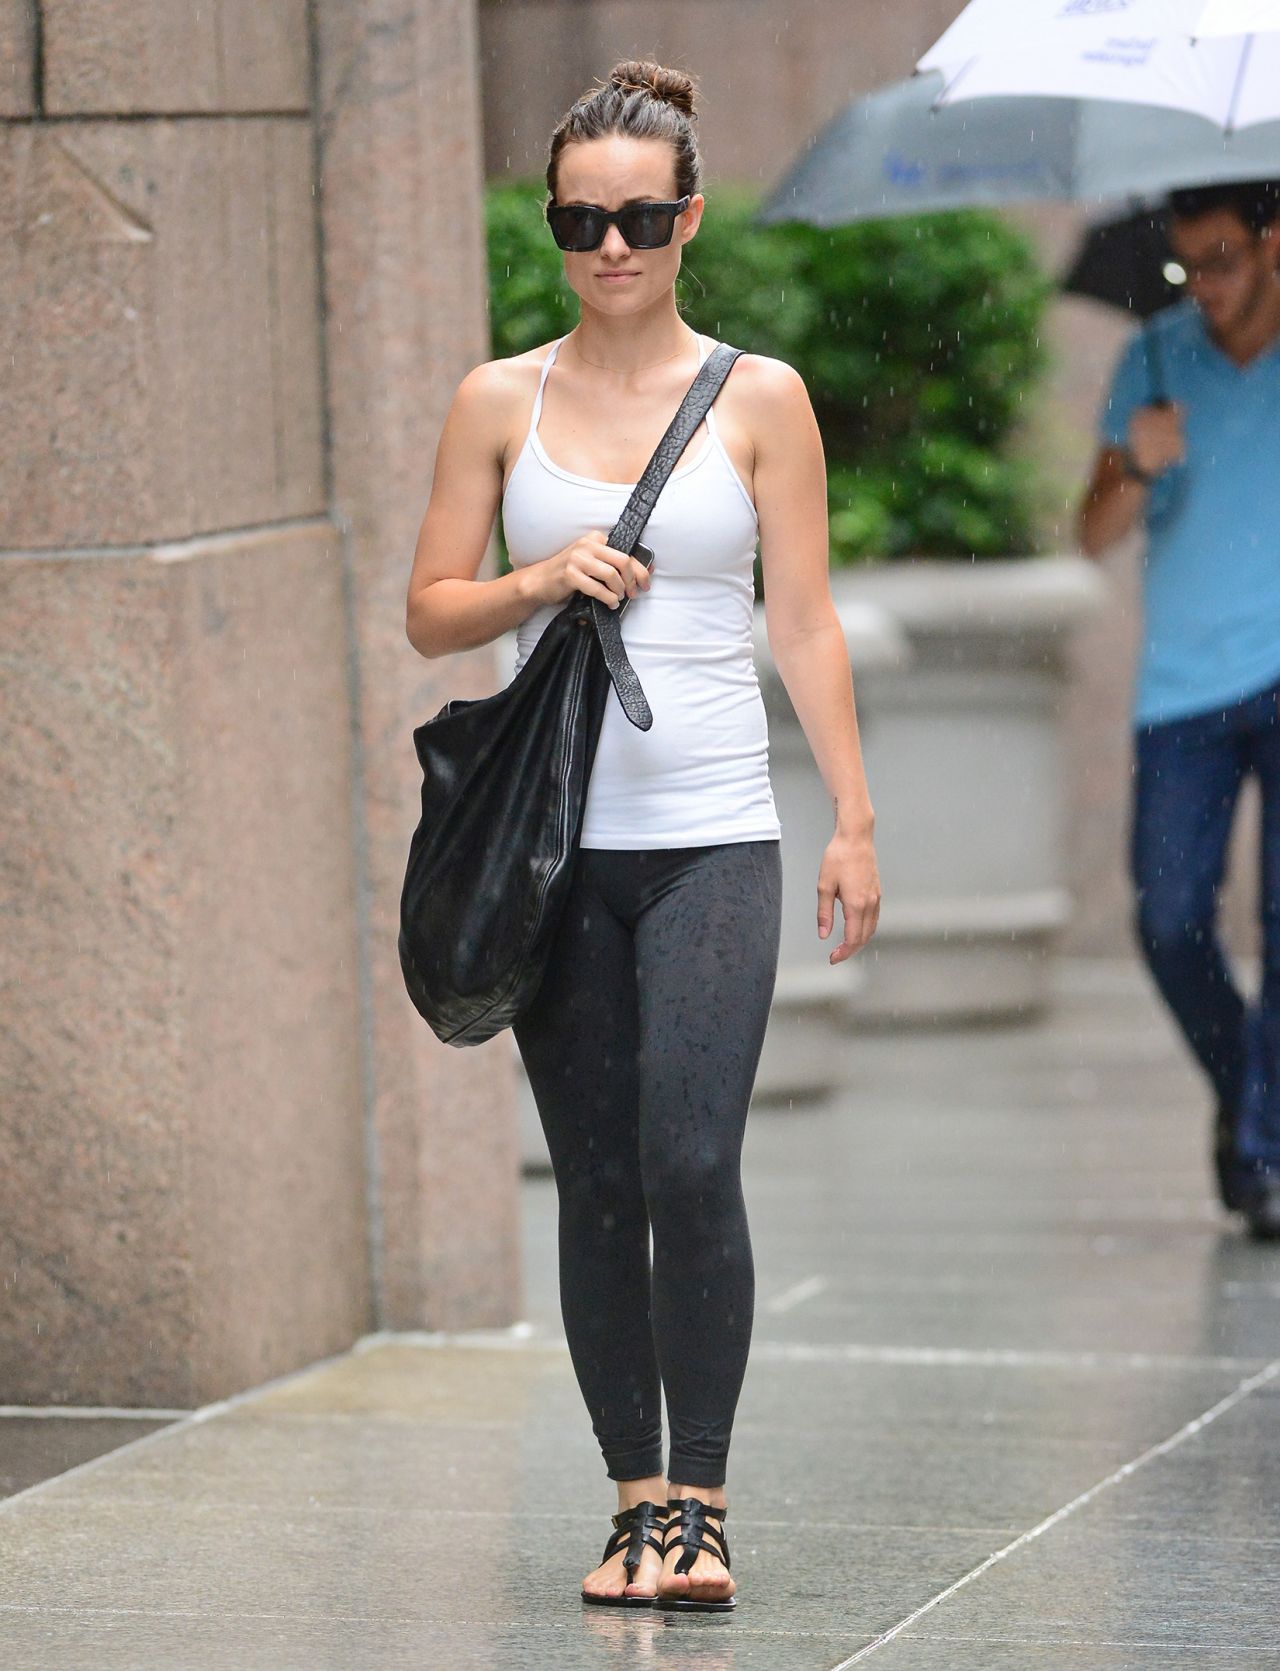 Olivia Wilde in Tights - Another Rainy Day in New York City - July 2014 ...